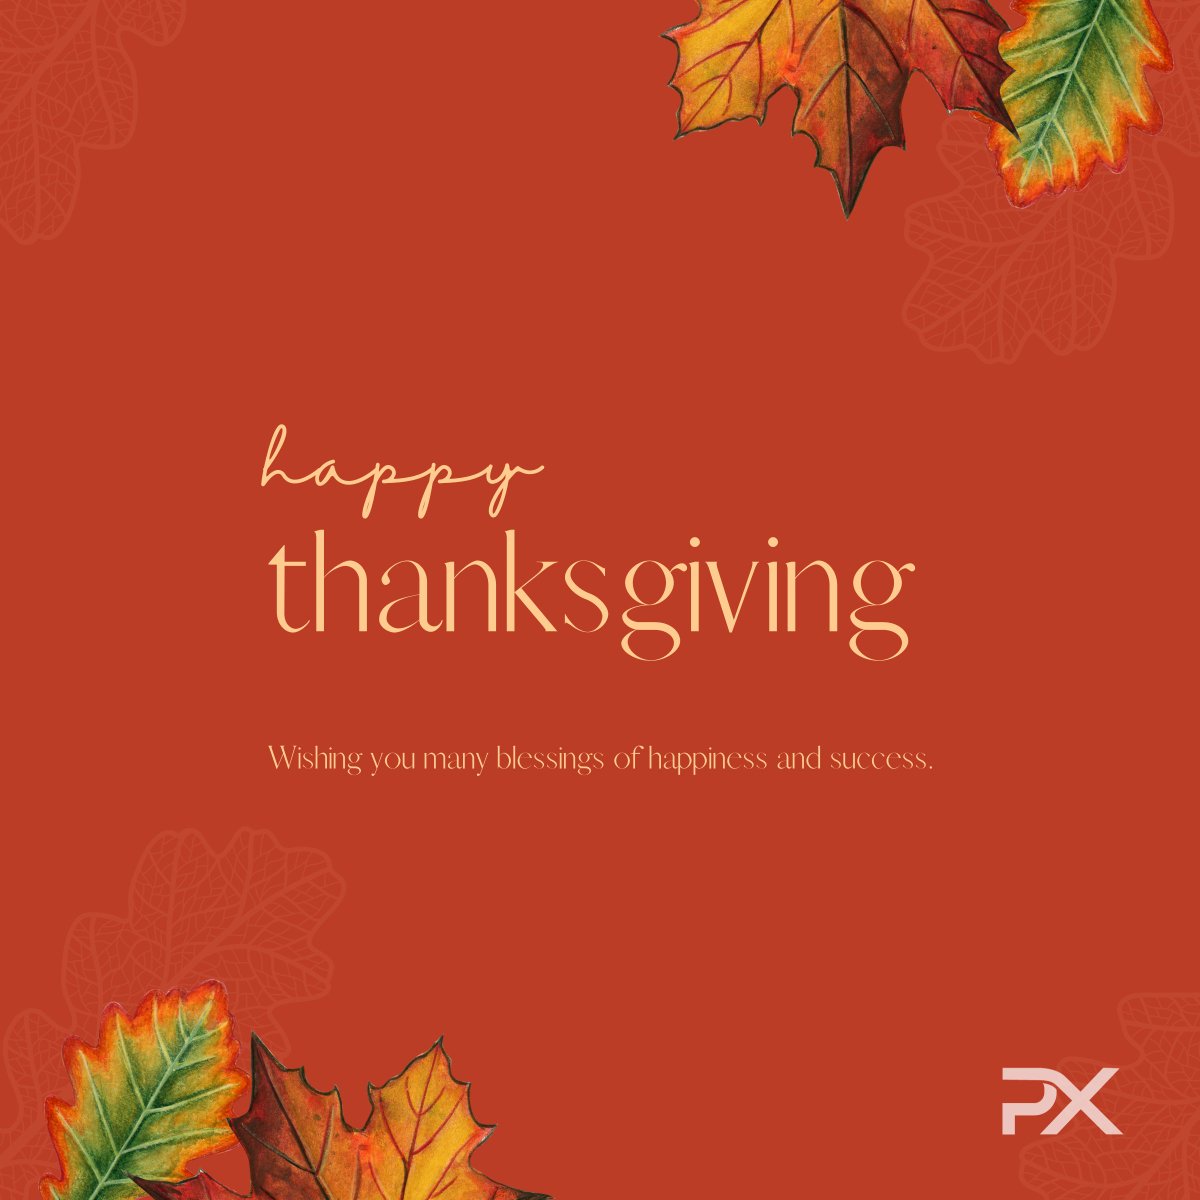 PX Technology will be closed Thursday, November 23rd and Friday, November 24th to celebrate Thanksgiving. We hope you have a wonderful few days with loved ones.